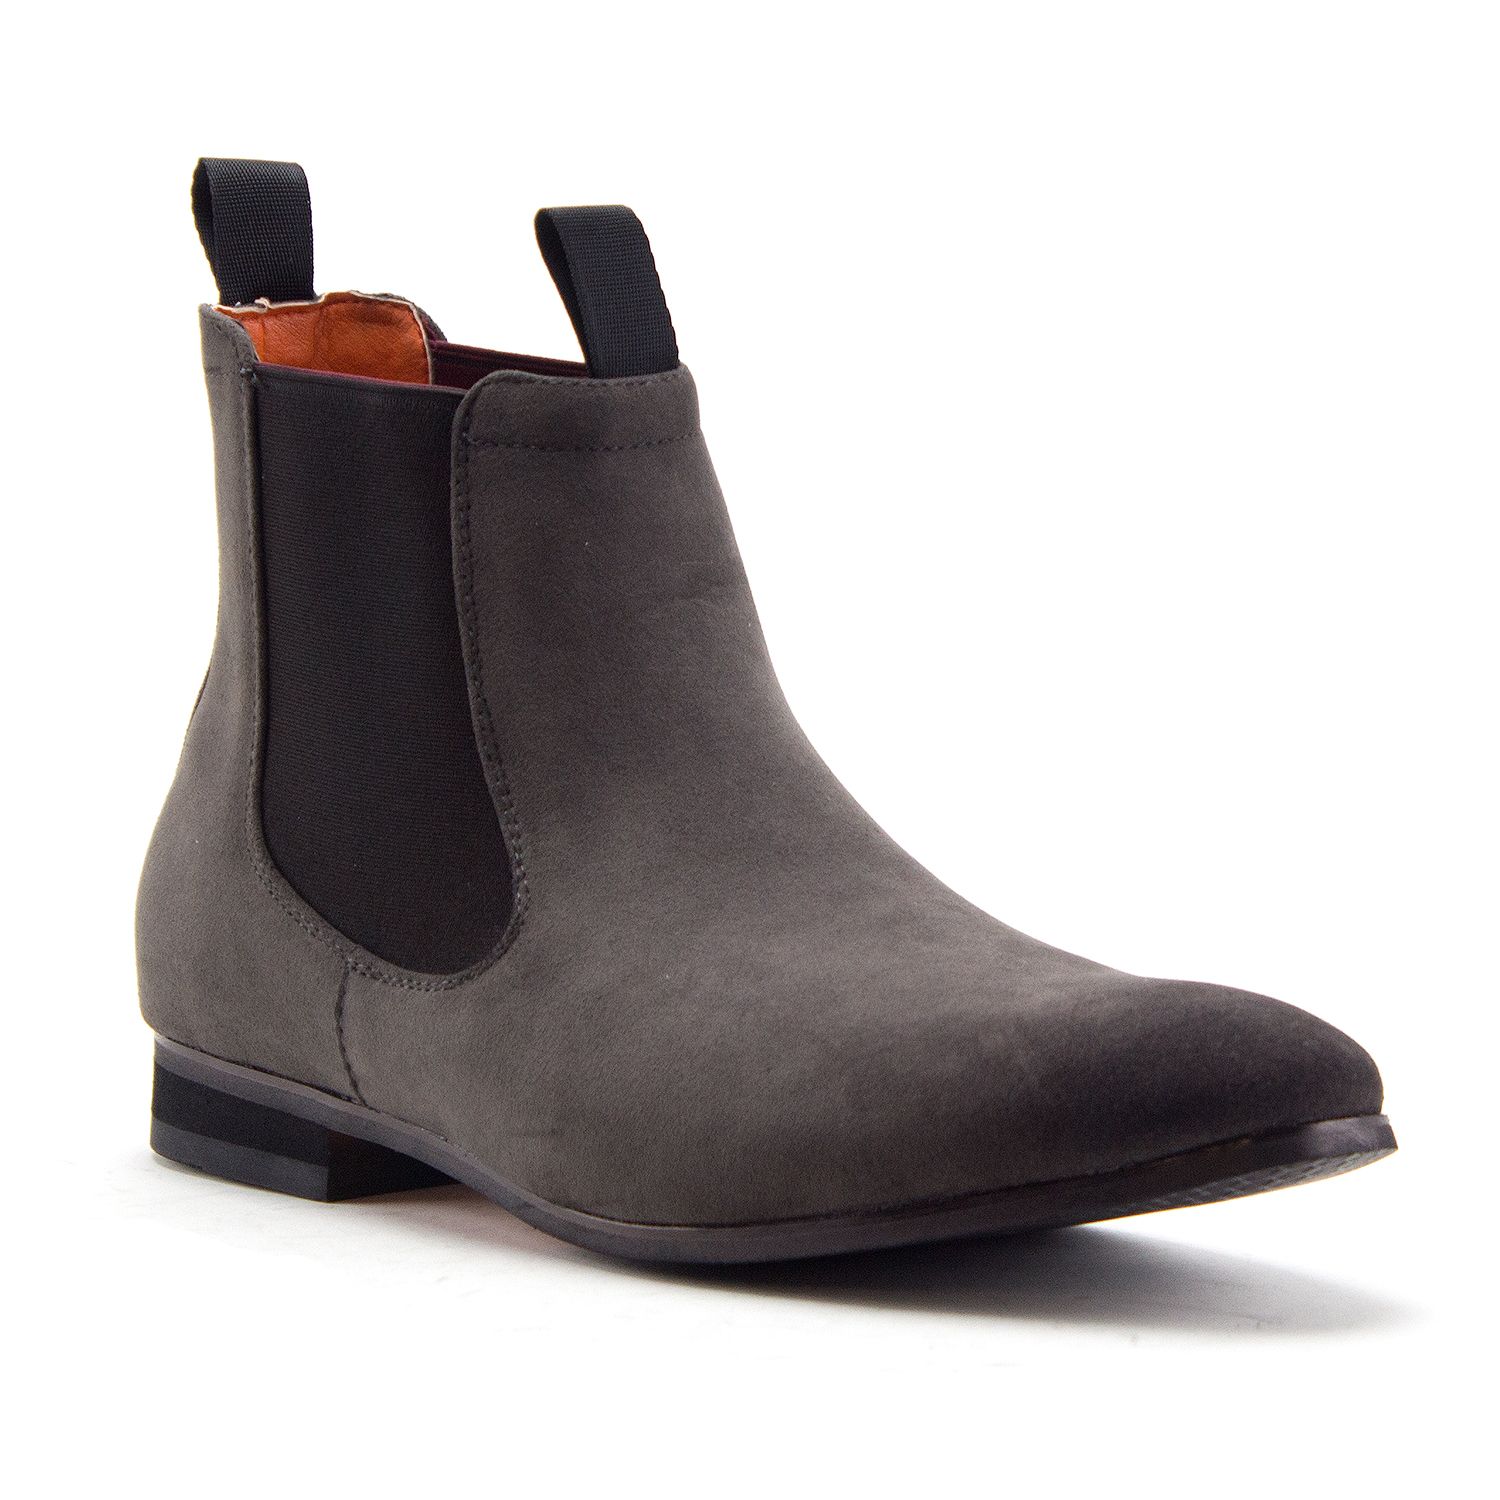 Men's B-746 Pull-On Nubuck Ankle High Chelsea Dress Boots, Charcoal, 9.5 - image 1 of 3